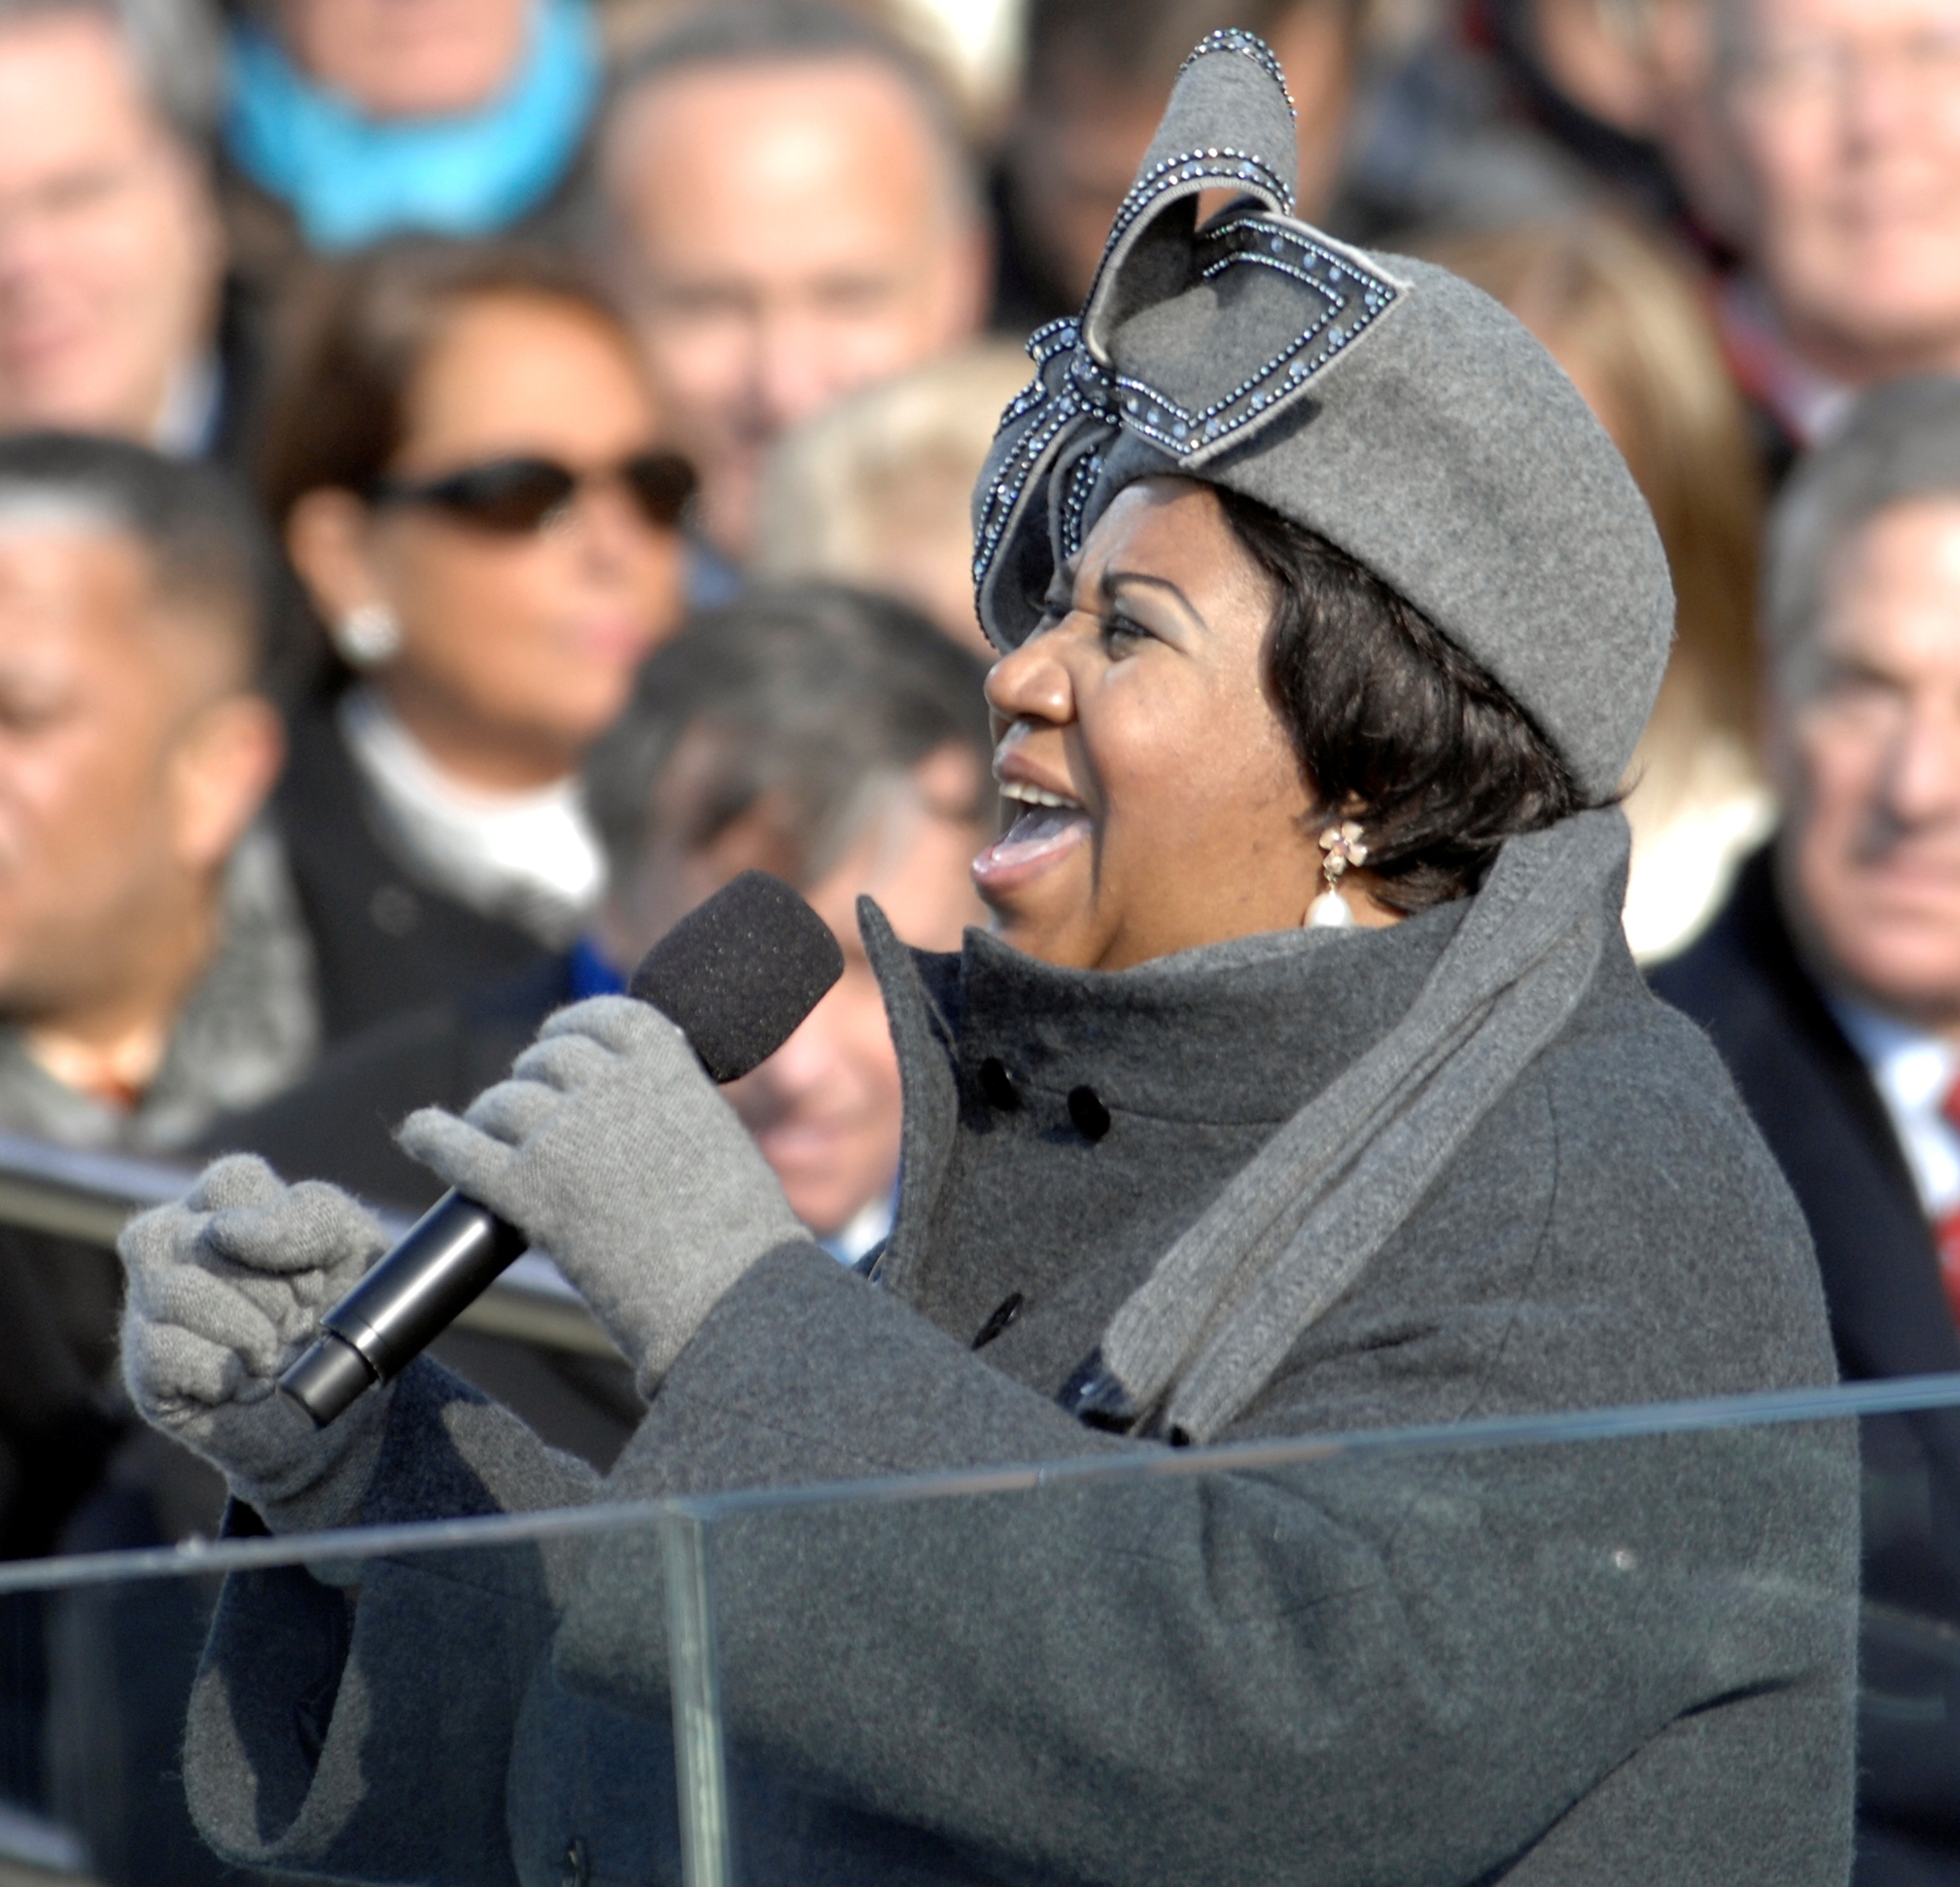 This image is being used in a piece highlighting why Aretha Franklin is a human rights inspiration